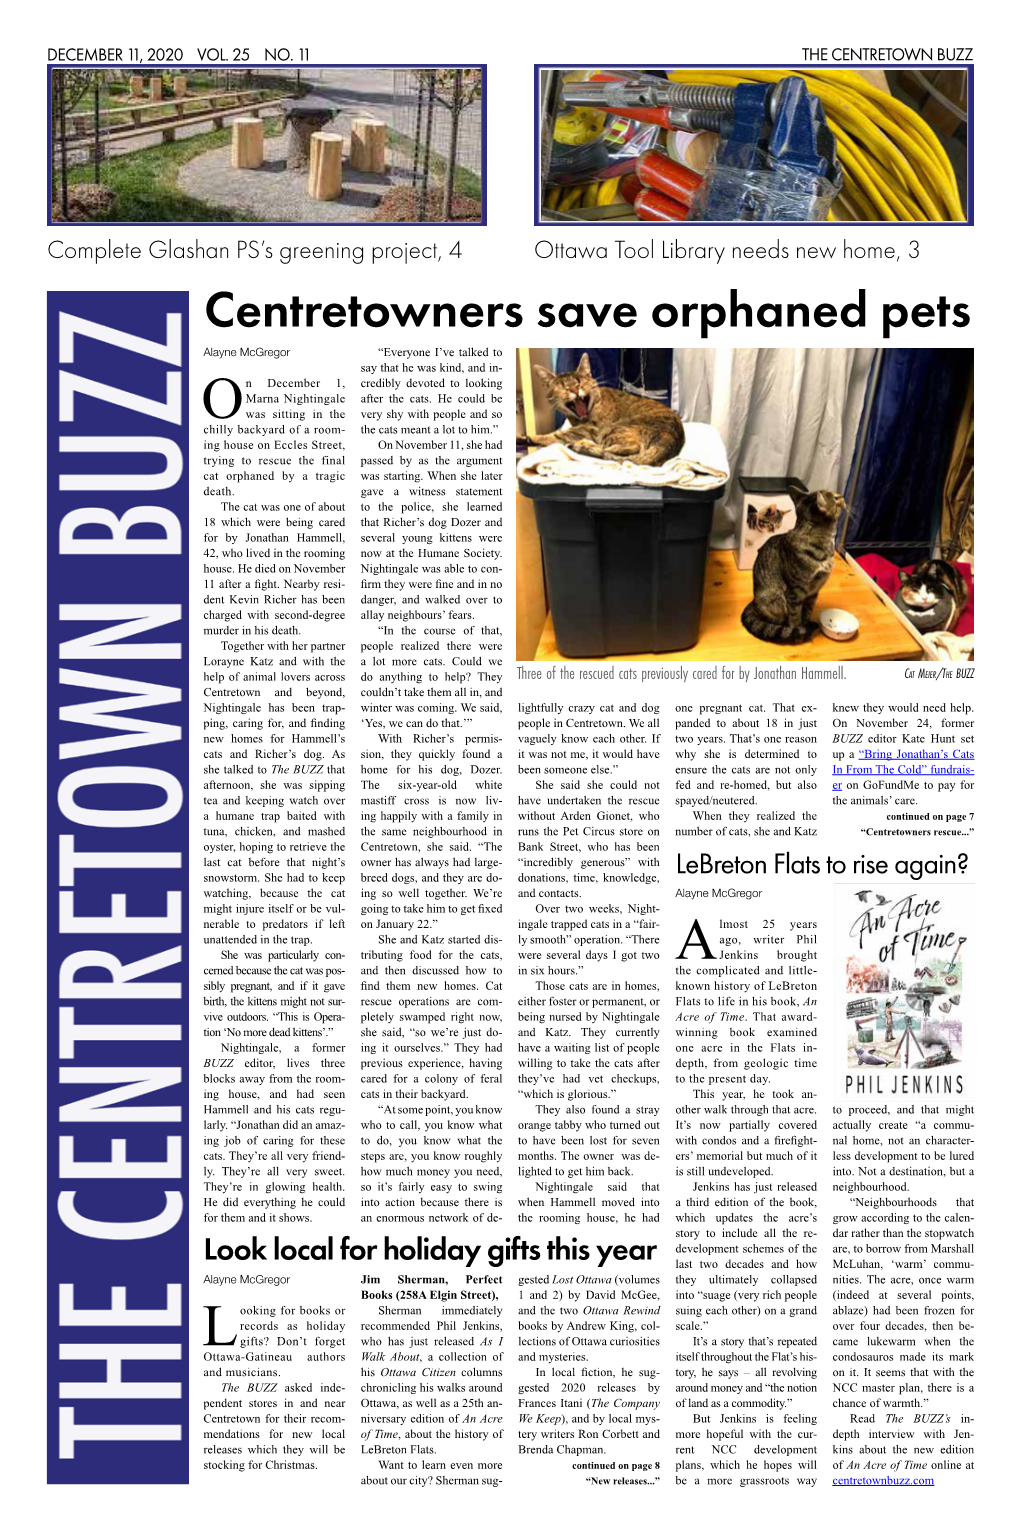 Centretowners Save Orphaned Pets